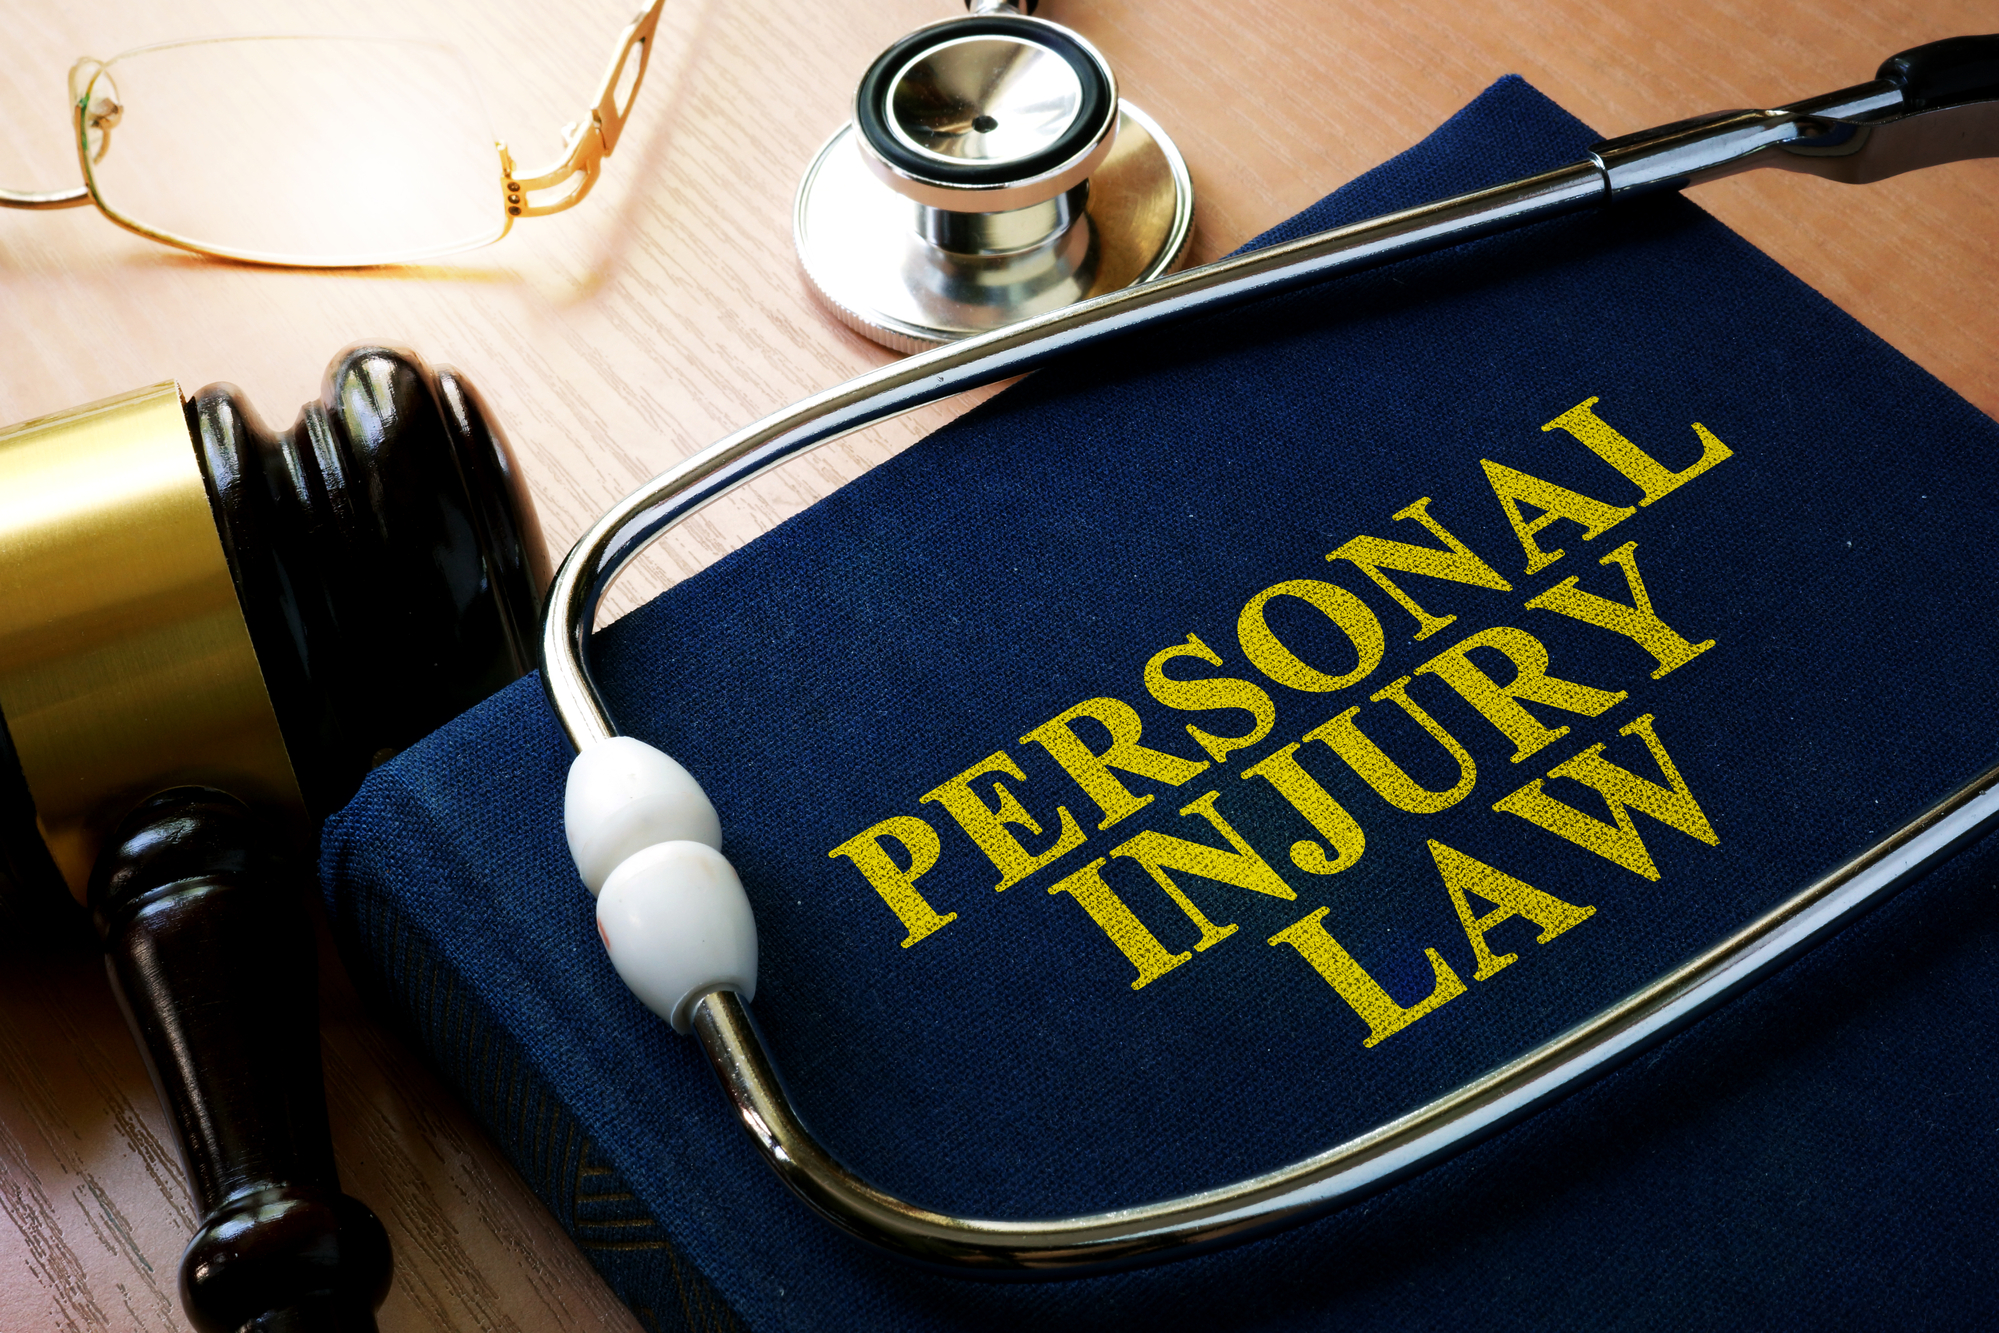 Personal Injury Lawyer Des Moines, IA